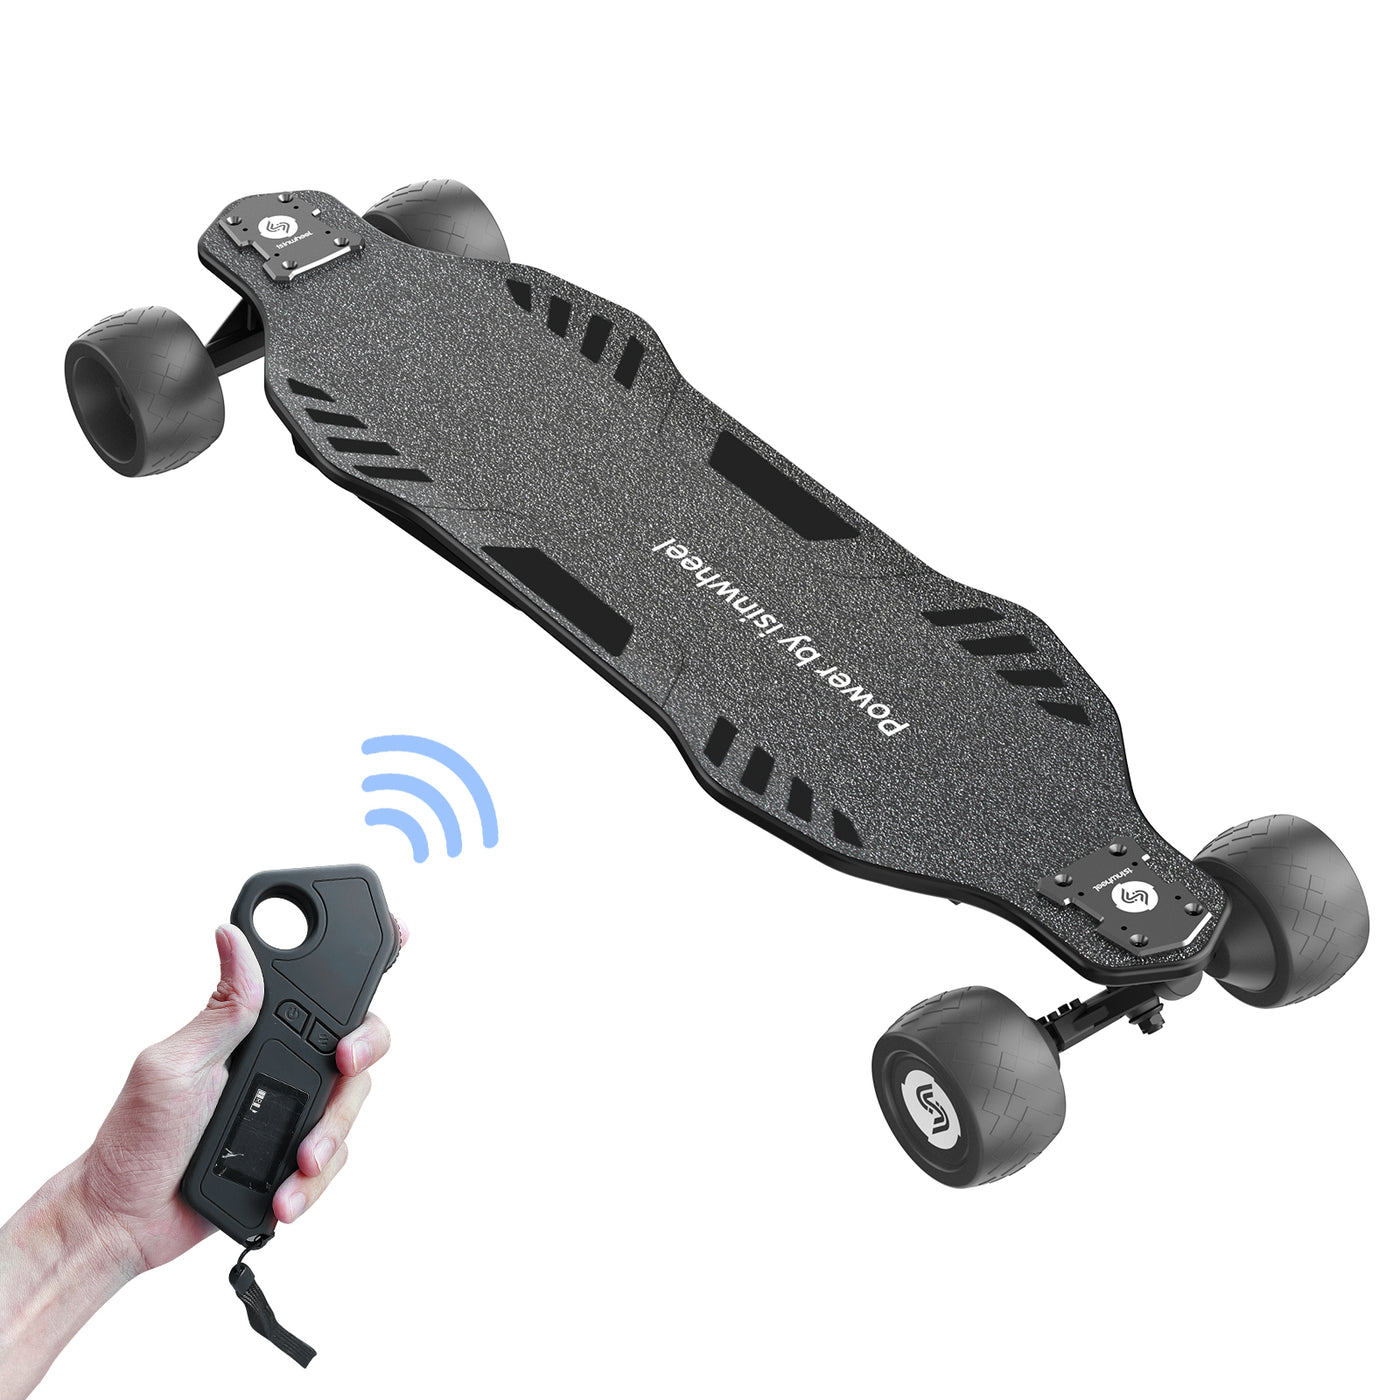 Aceshin Electric Skateboard Handheld Control Remote Portable with Wireless 